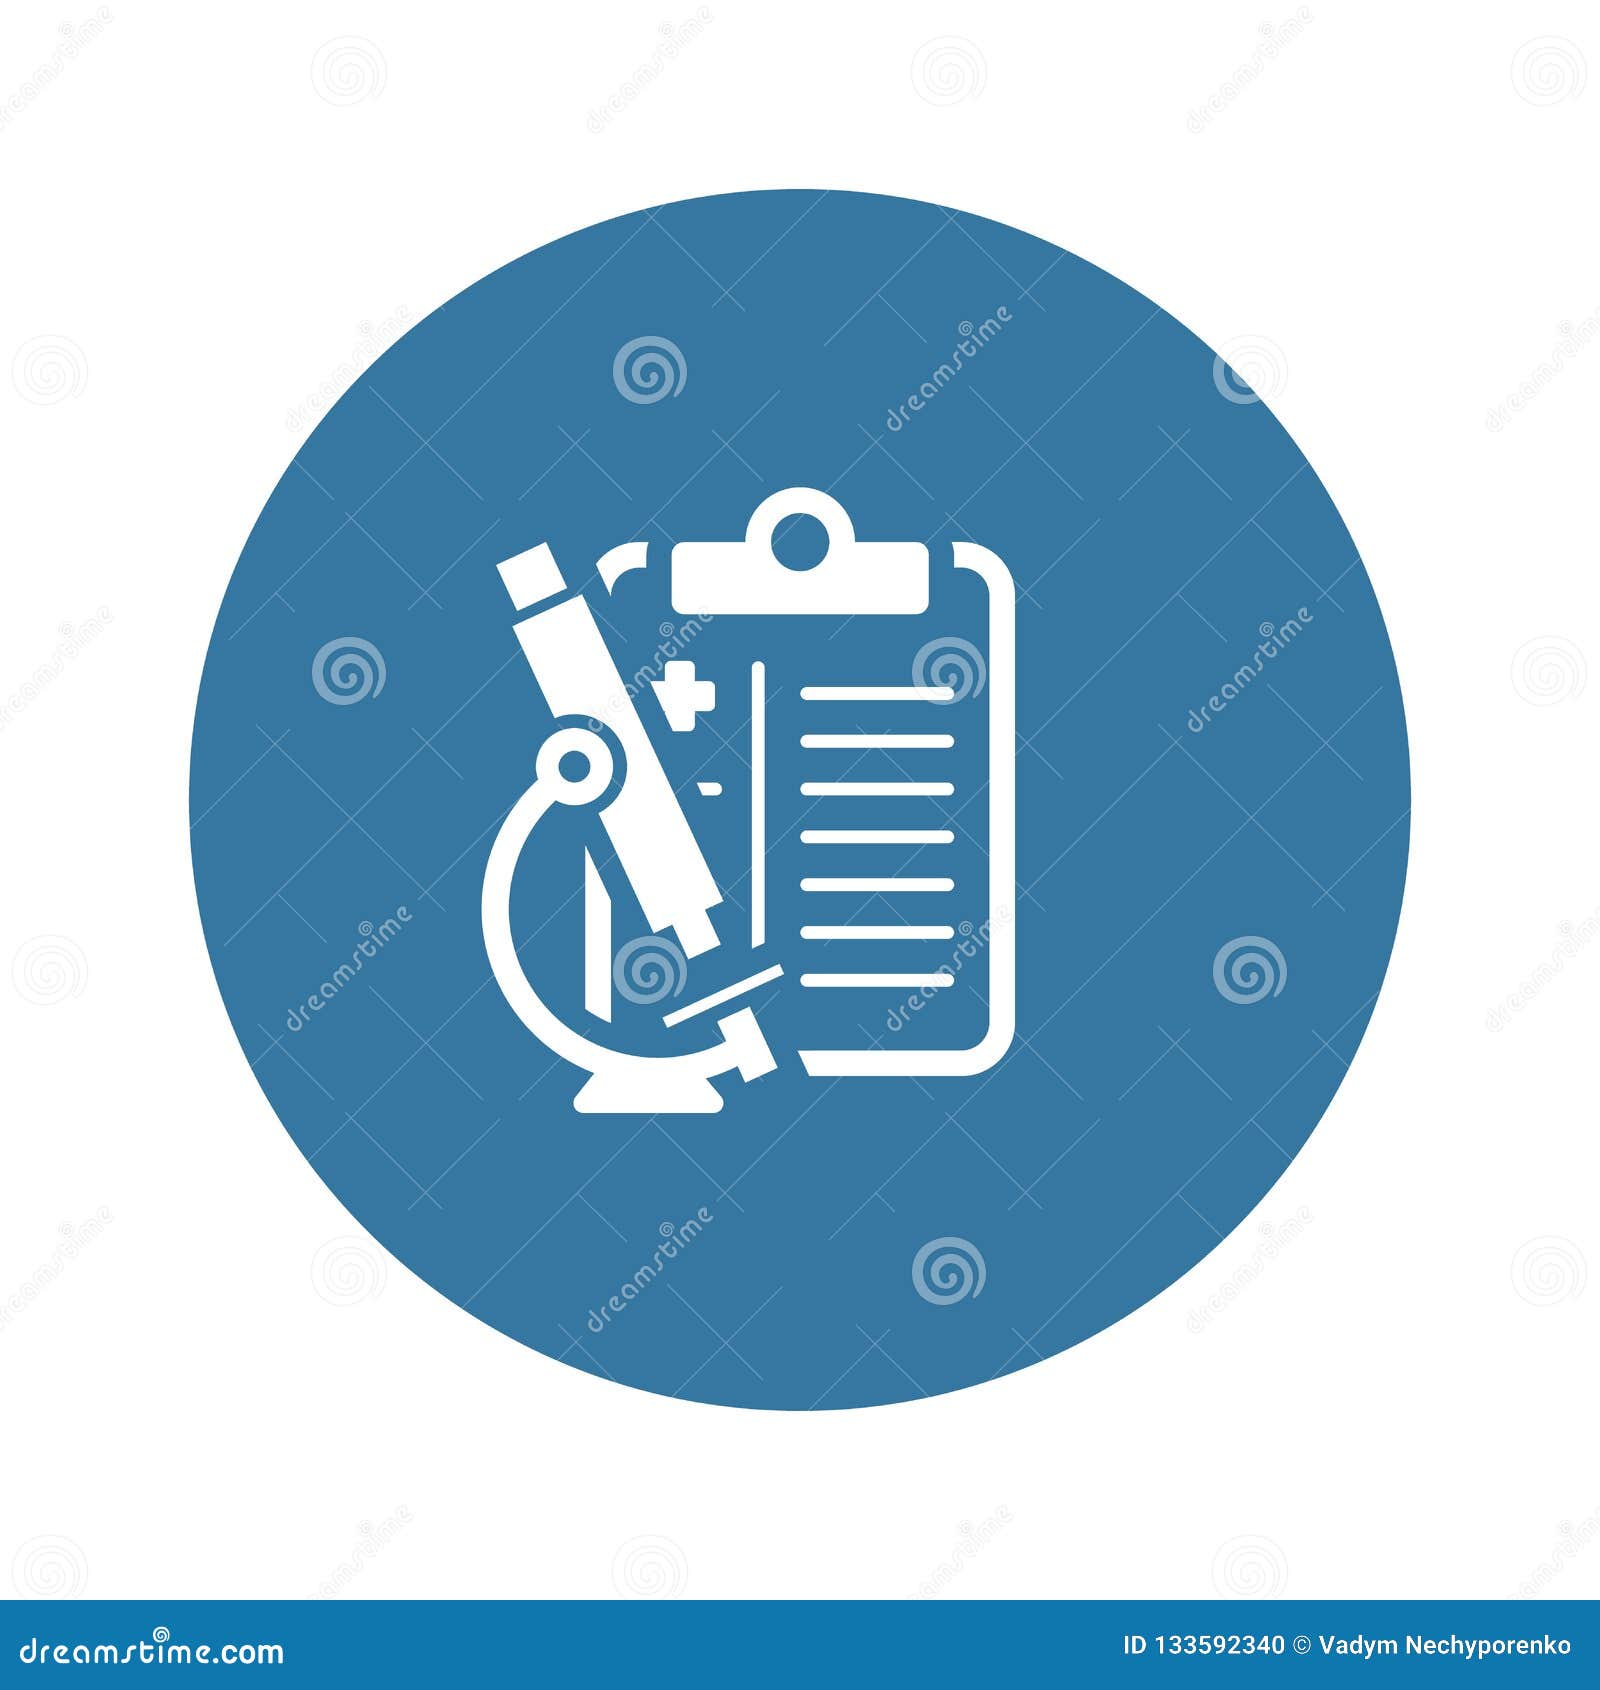 cytology and medical services flat icon